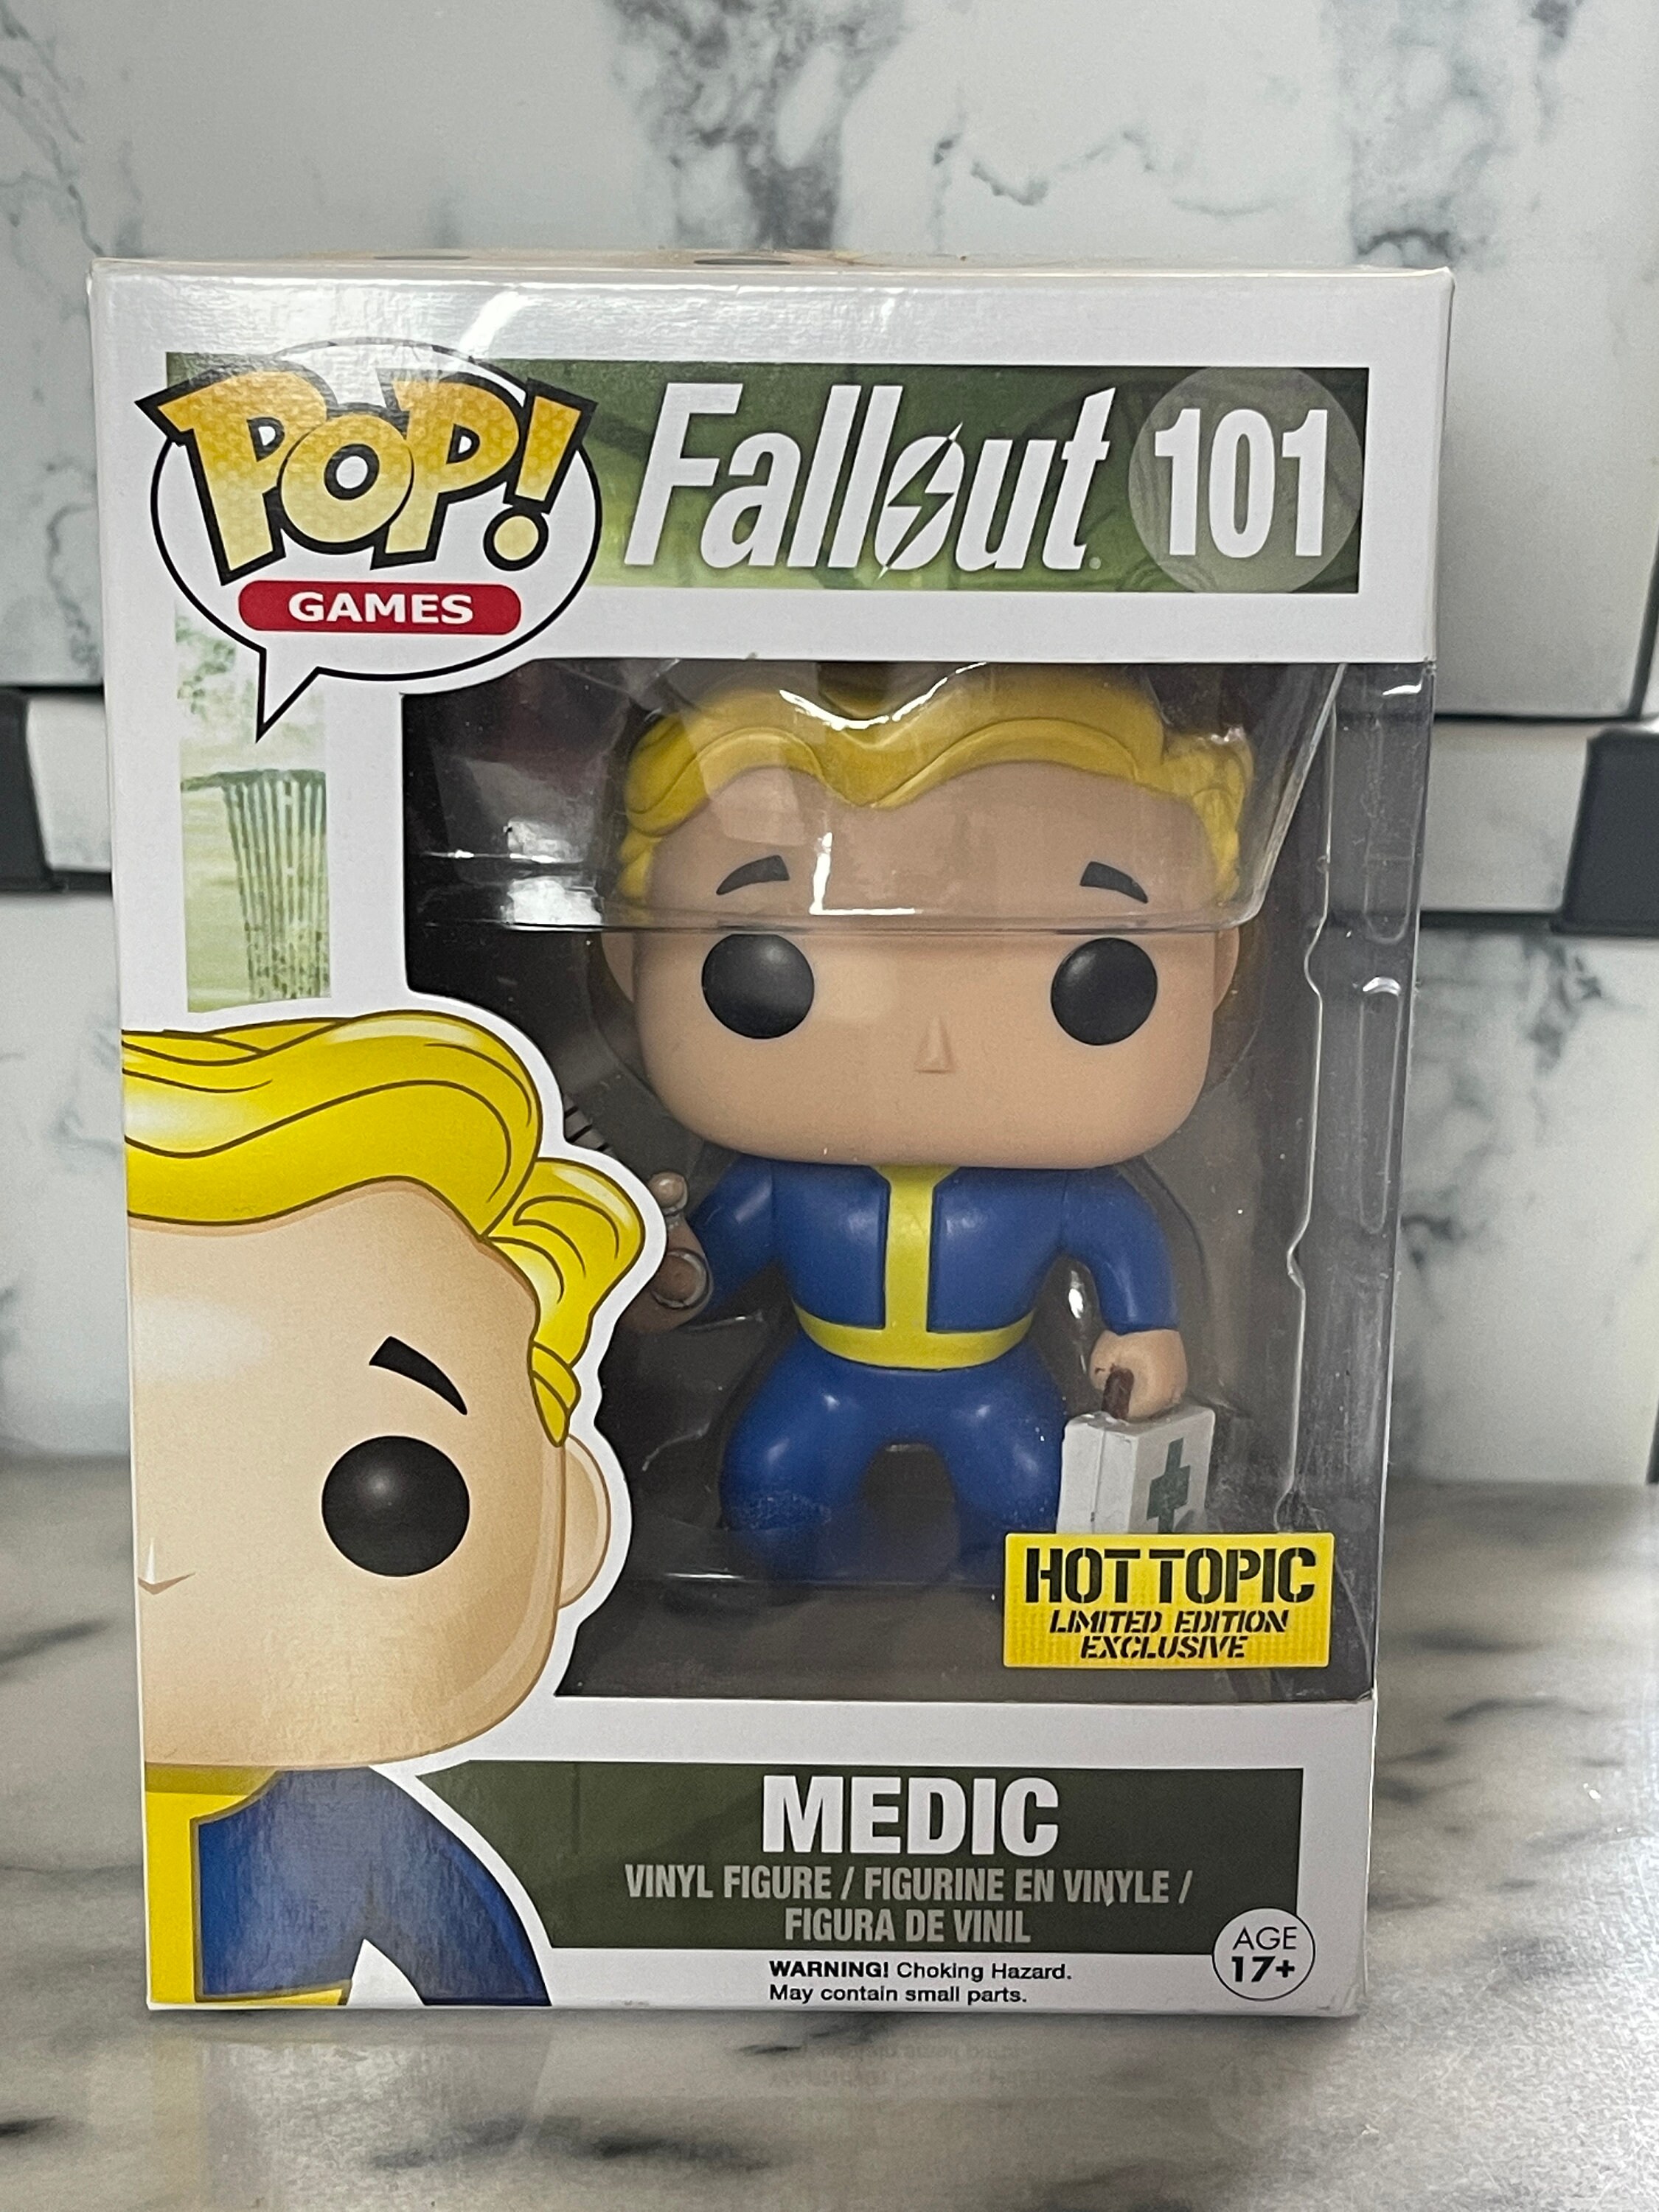 Fallout 101 Medic Funko Pop Hot Topic Limited Edition - Etsy 日本